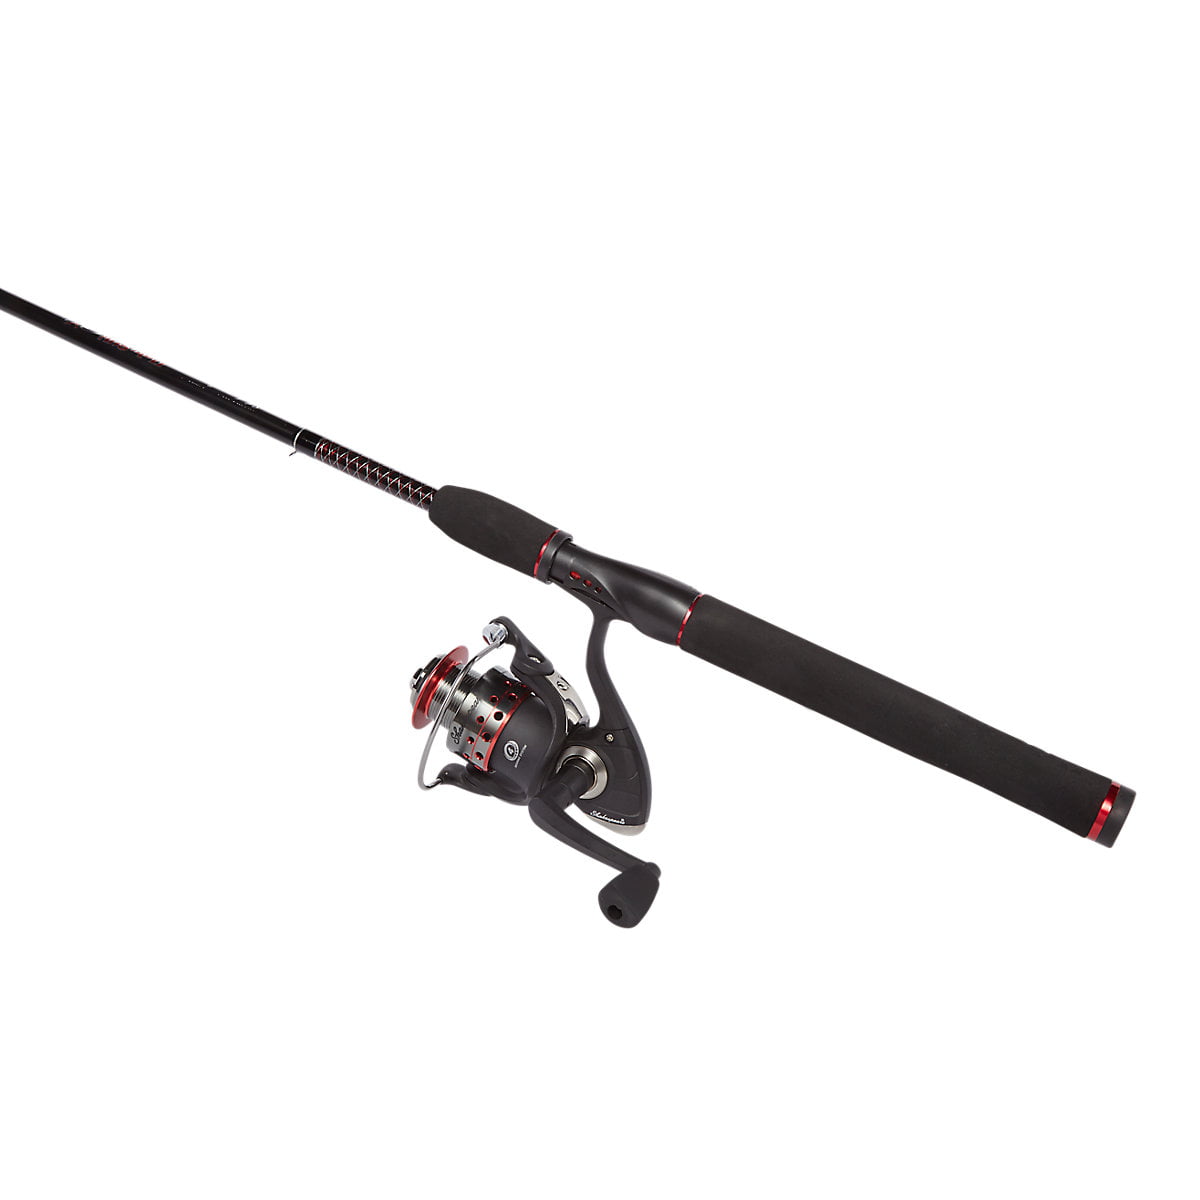 Ugly Stik 6’6” GX2 Spinning Fishing Rod and Reel Spinning Combo - atozdepot23